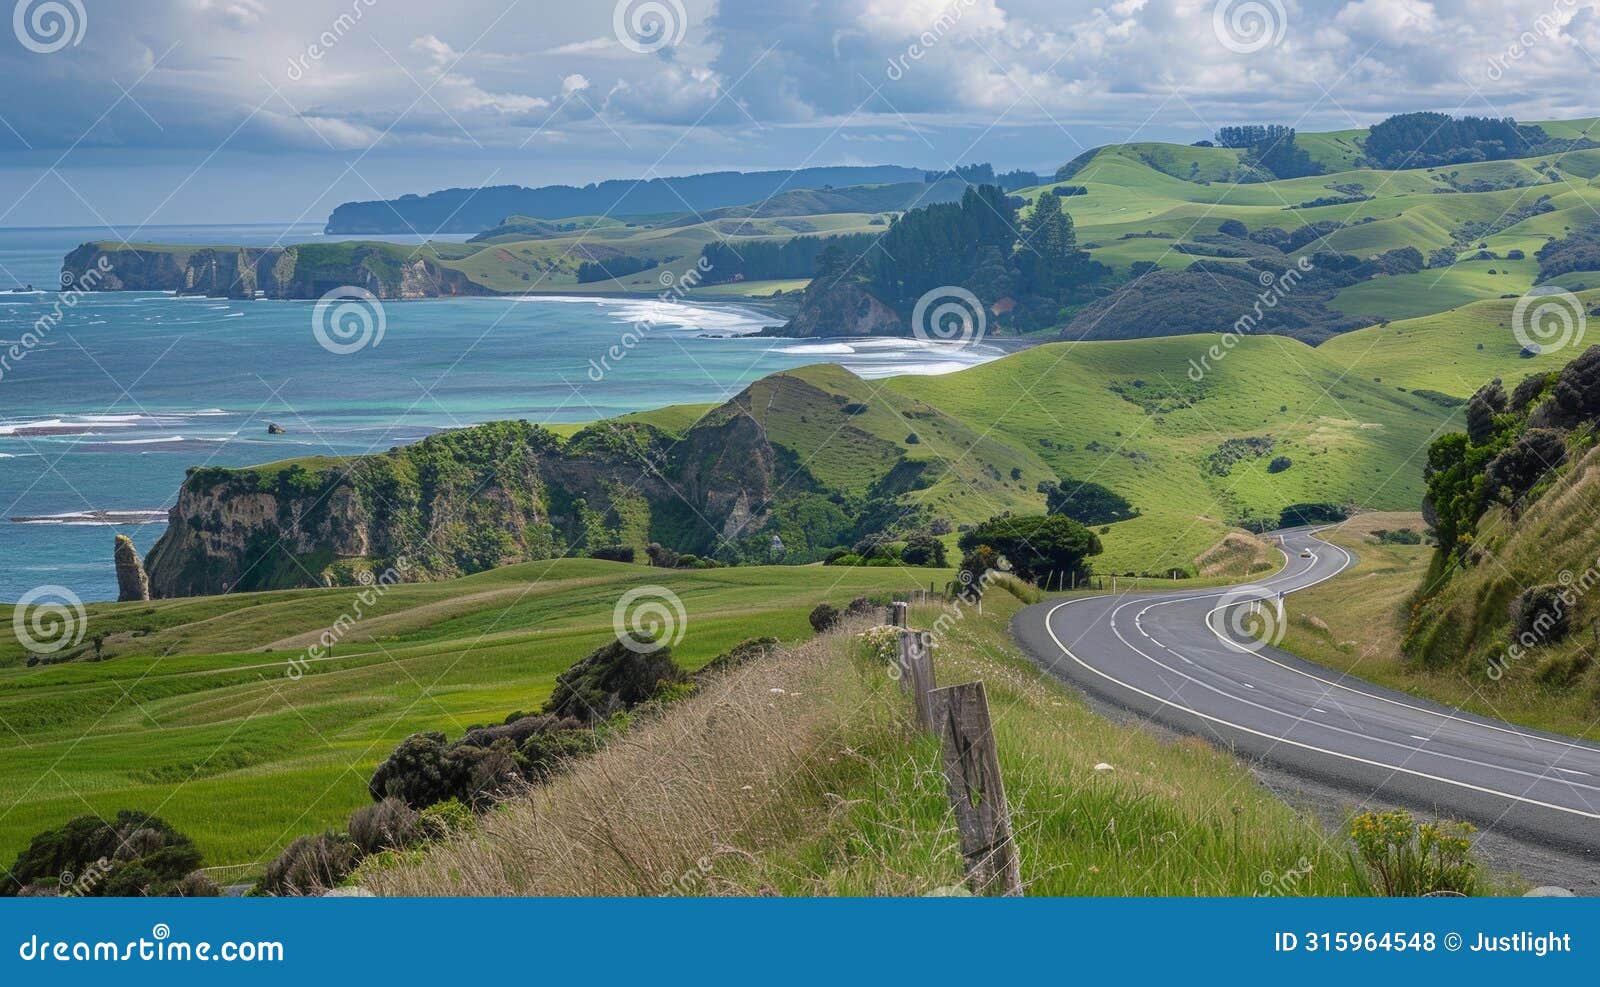 the panoramic view from the road is a patchwork of earth sea and sky. verdant hillsides give way to dramatic cliffs